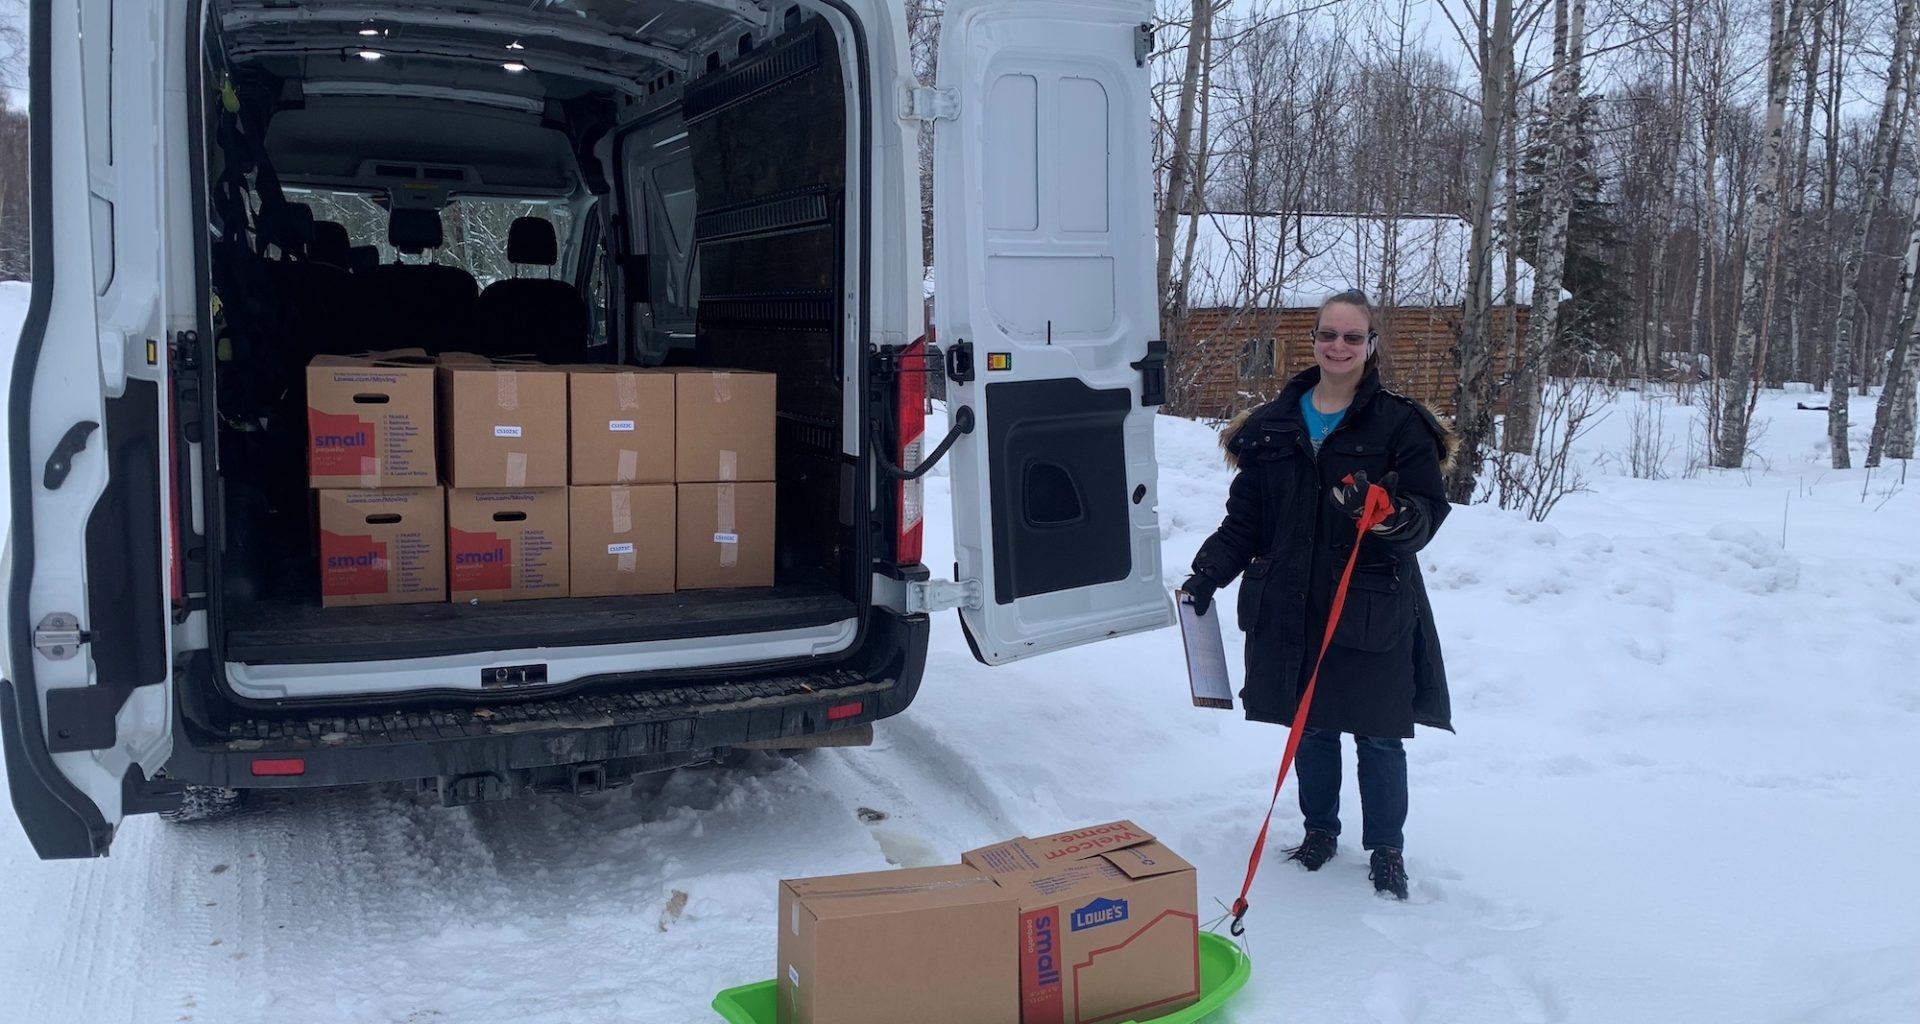 Food box delivery drivers brave the elements in Central Alaska